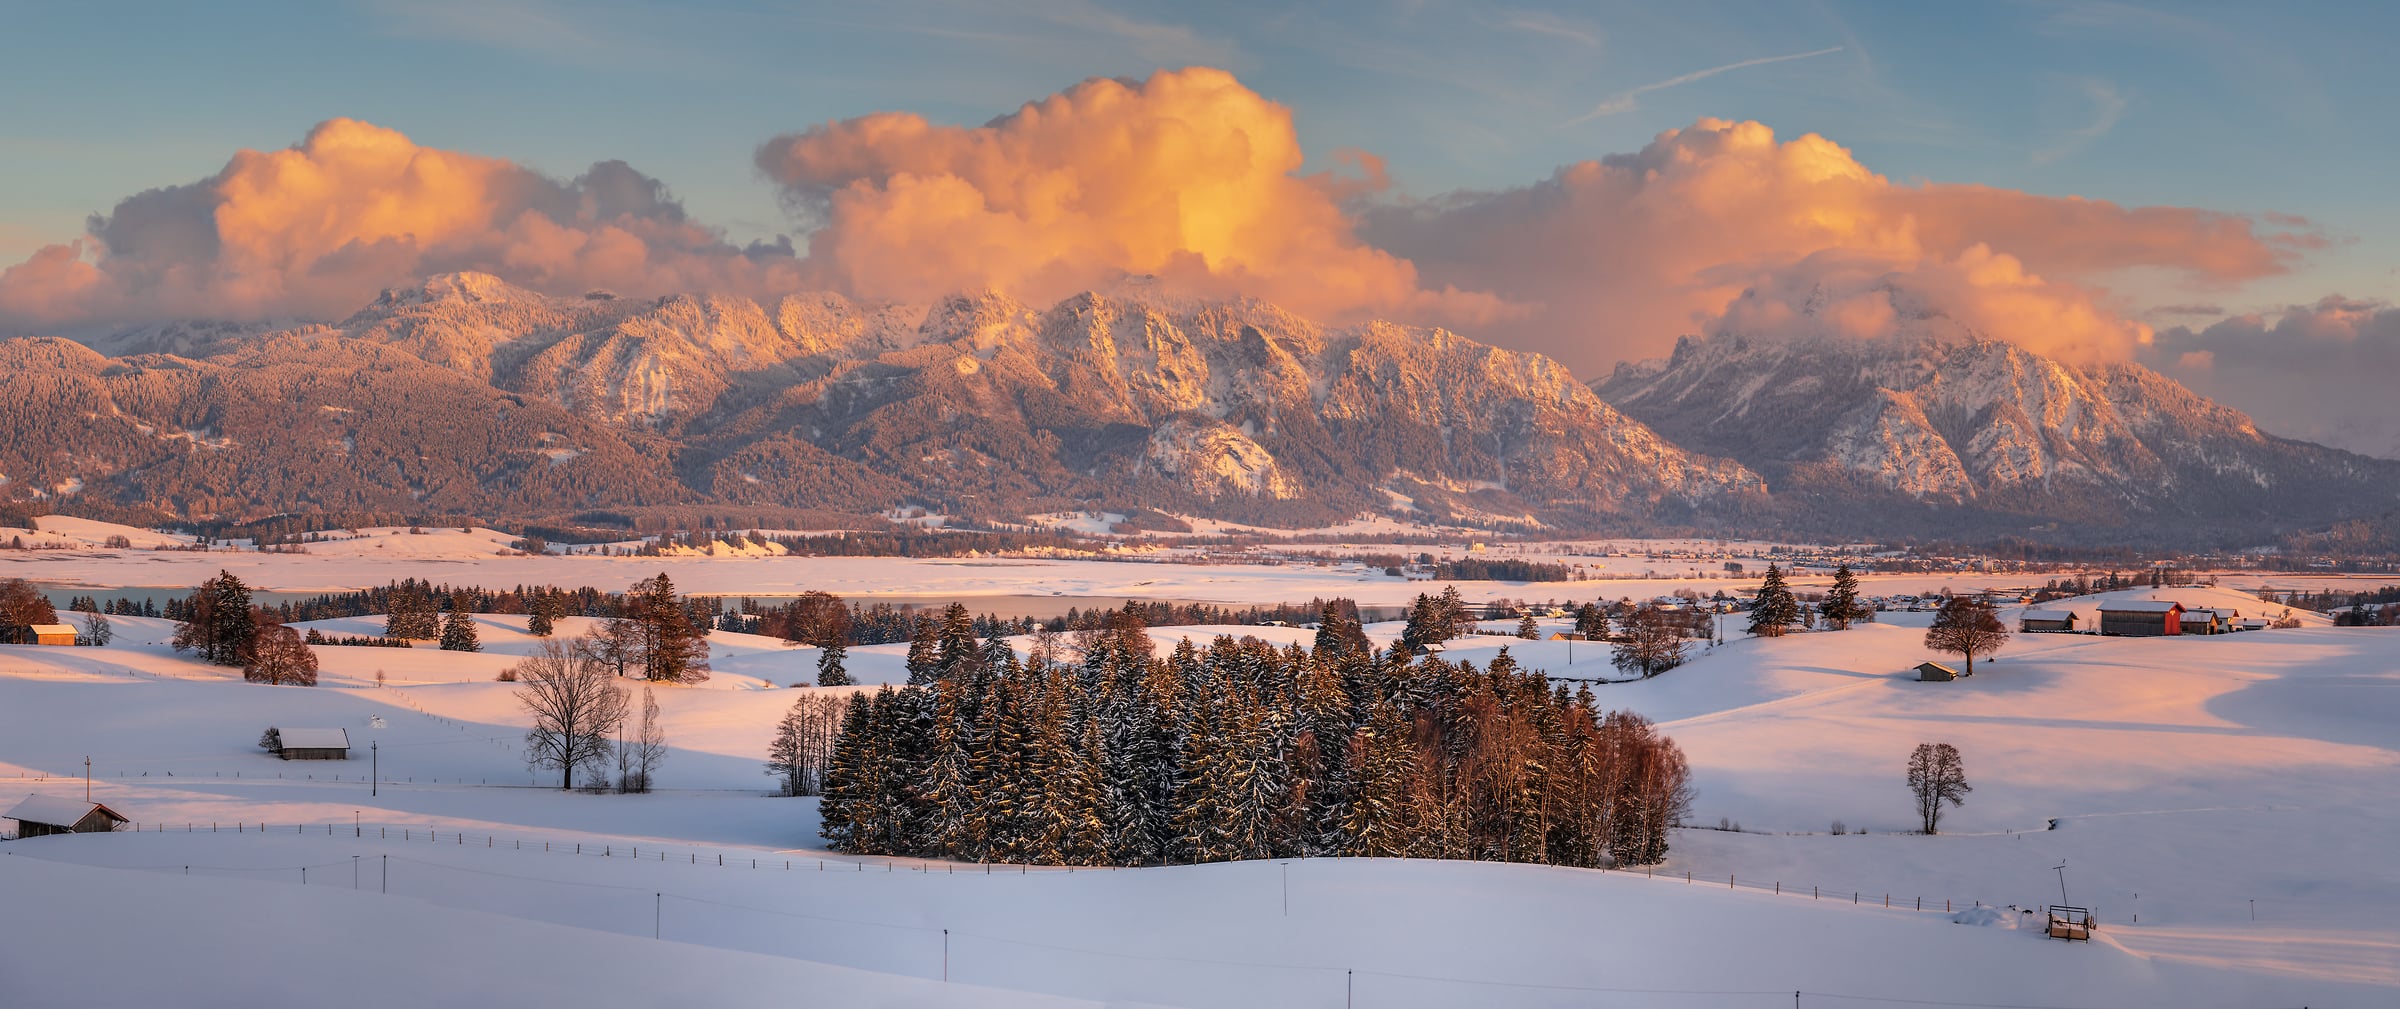 797 megapixels! A very high resolution, large-format VAST photo print of scenic winter landscape with mountains and snowy farm fields at sunset; photograph created by Alfred Feil in Füssen, Bavaria, Germany